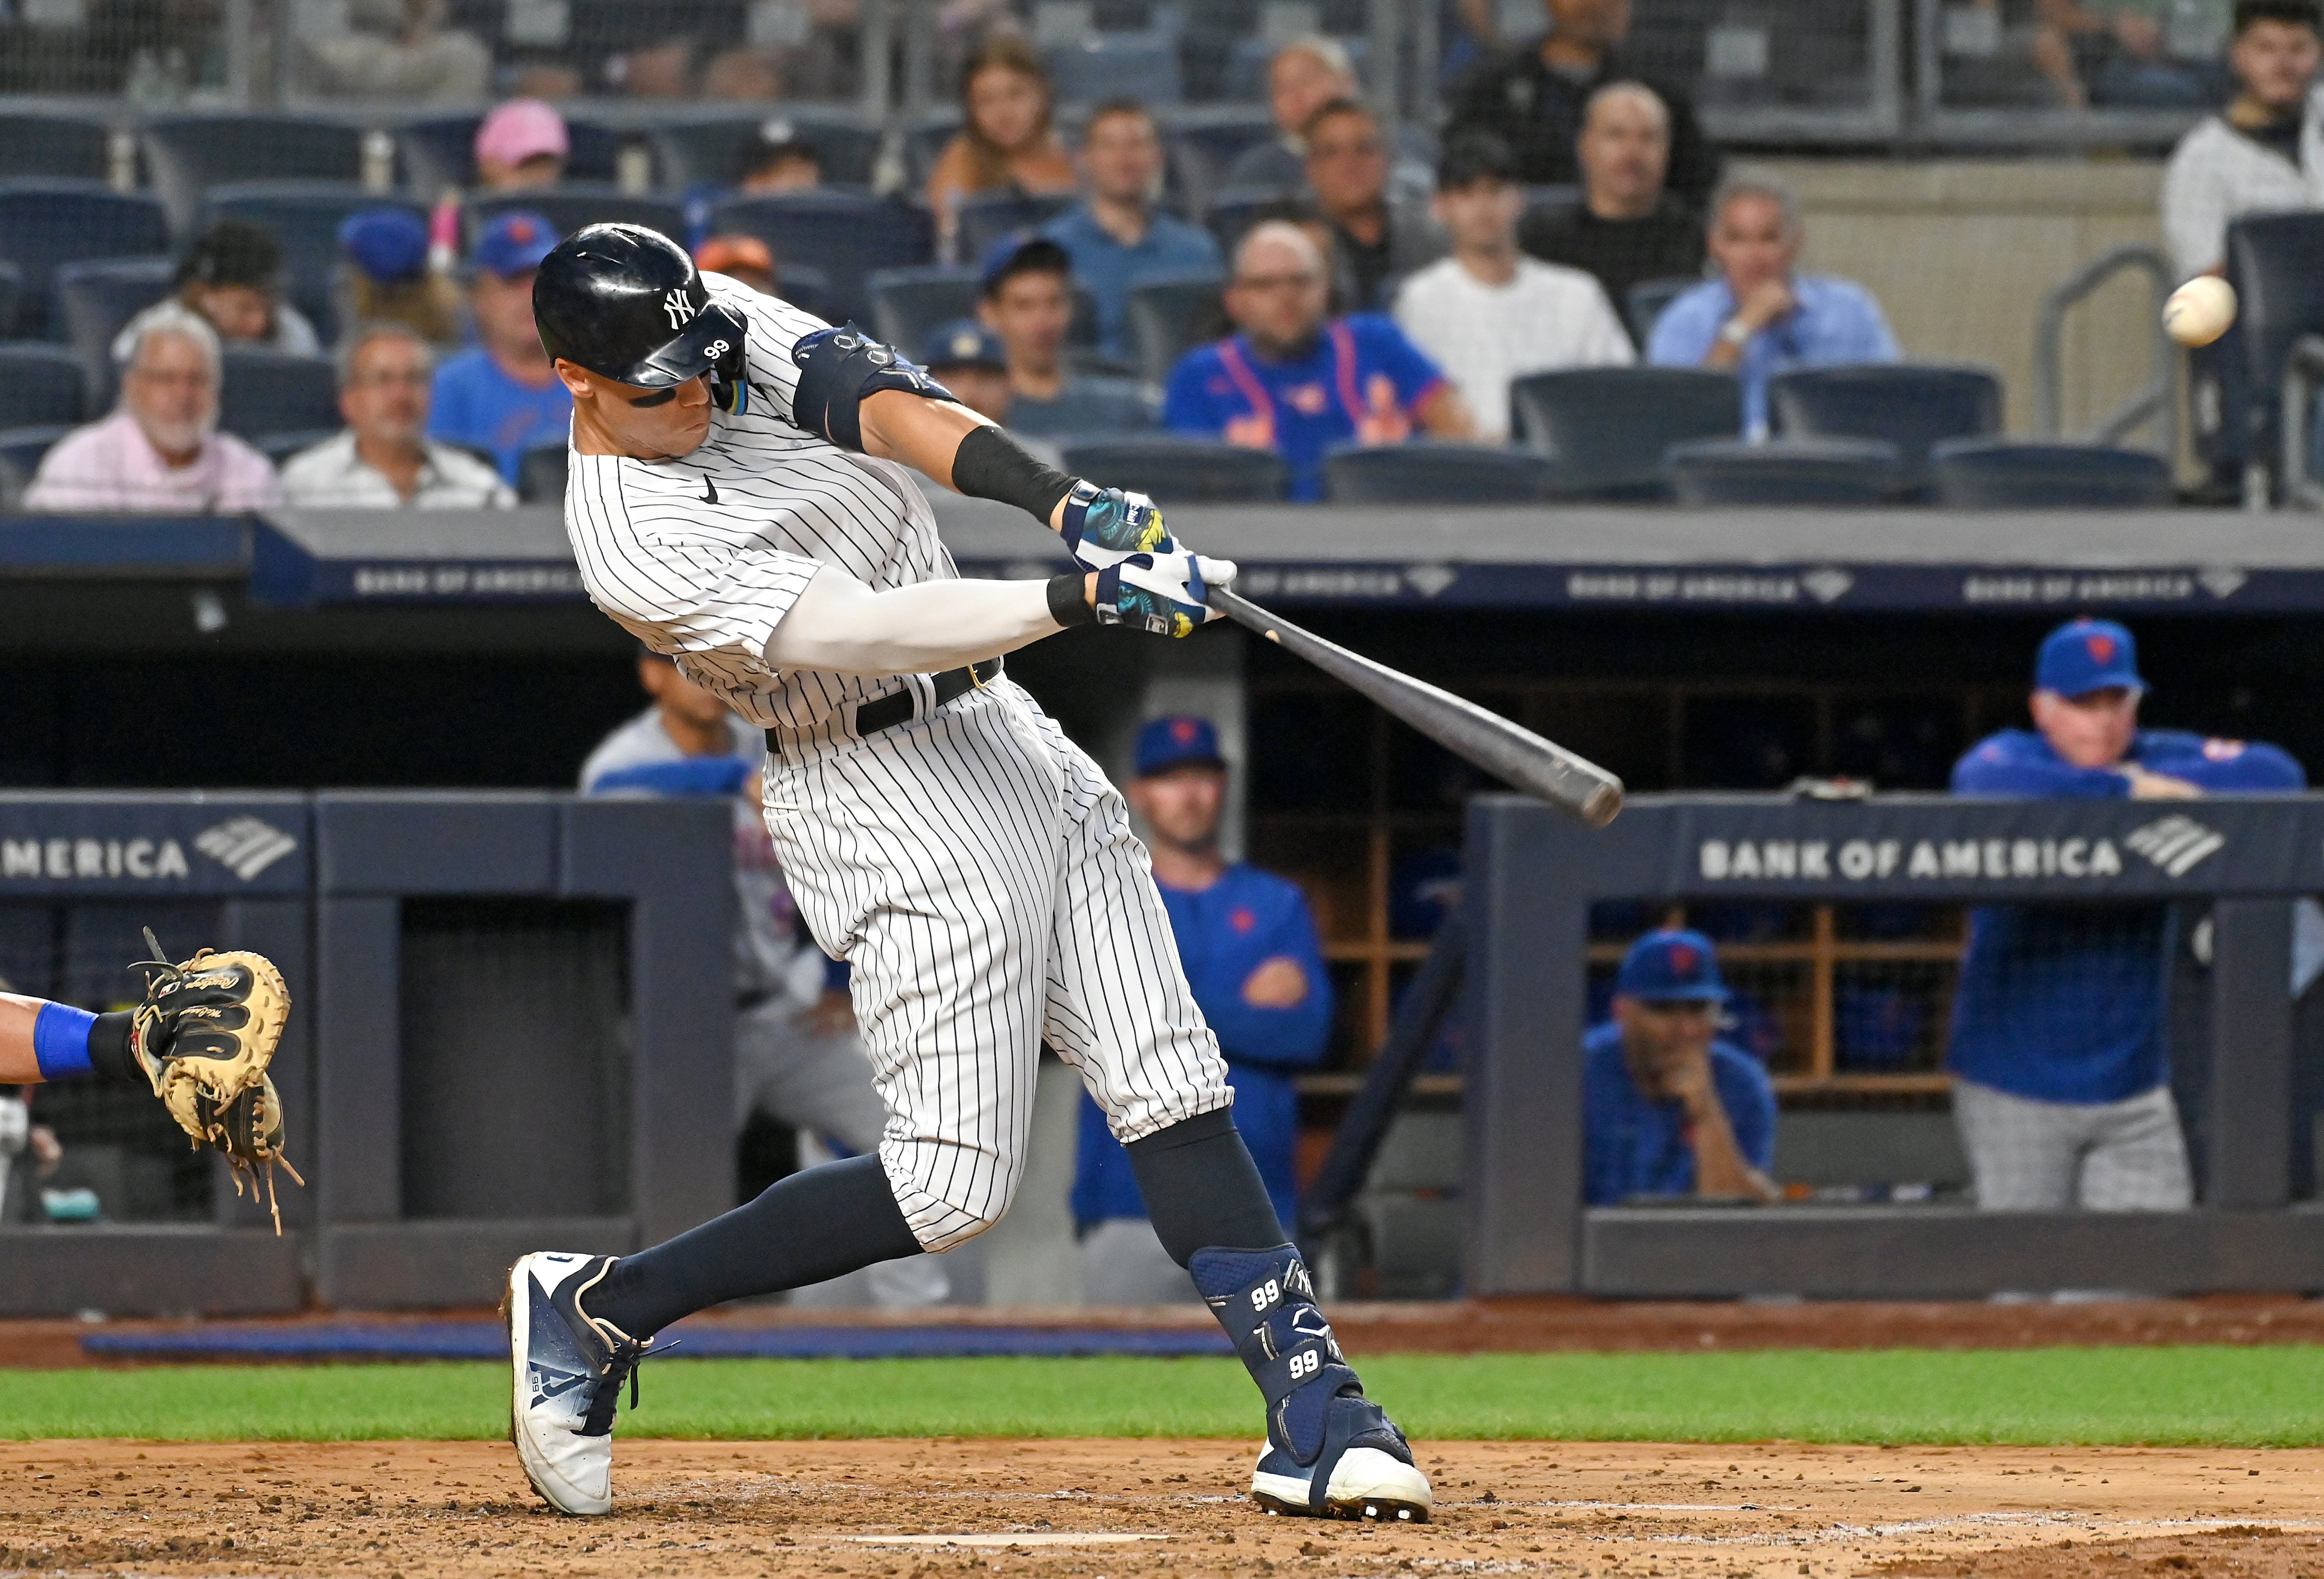 Aaron Judge launches a solo home run in the third inning.